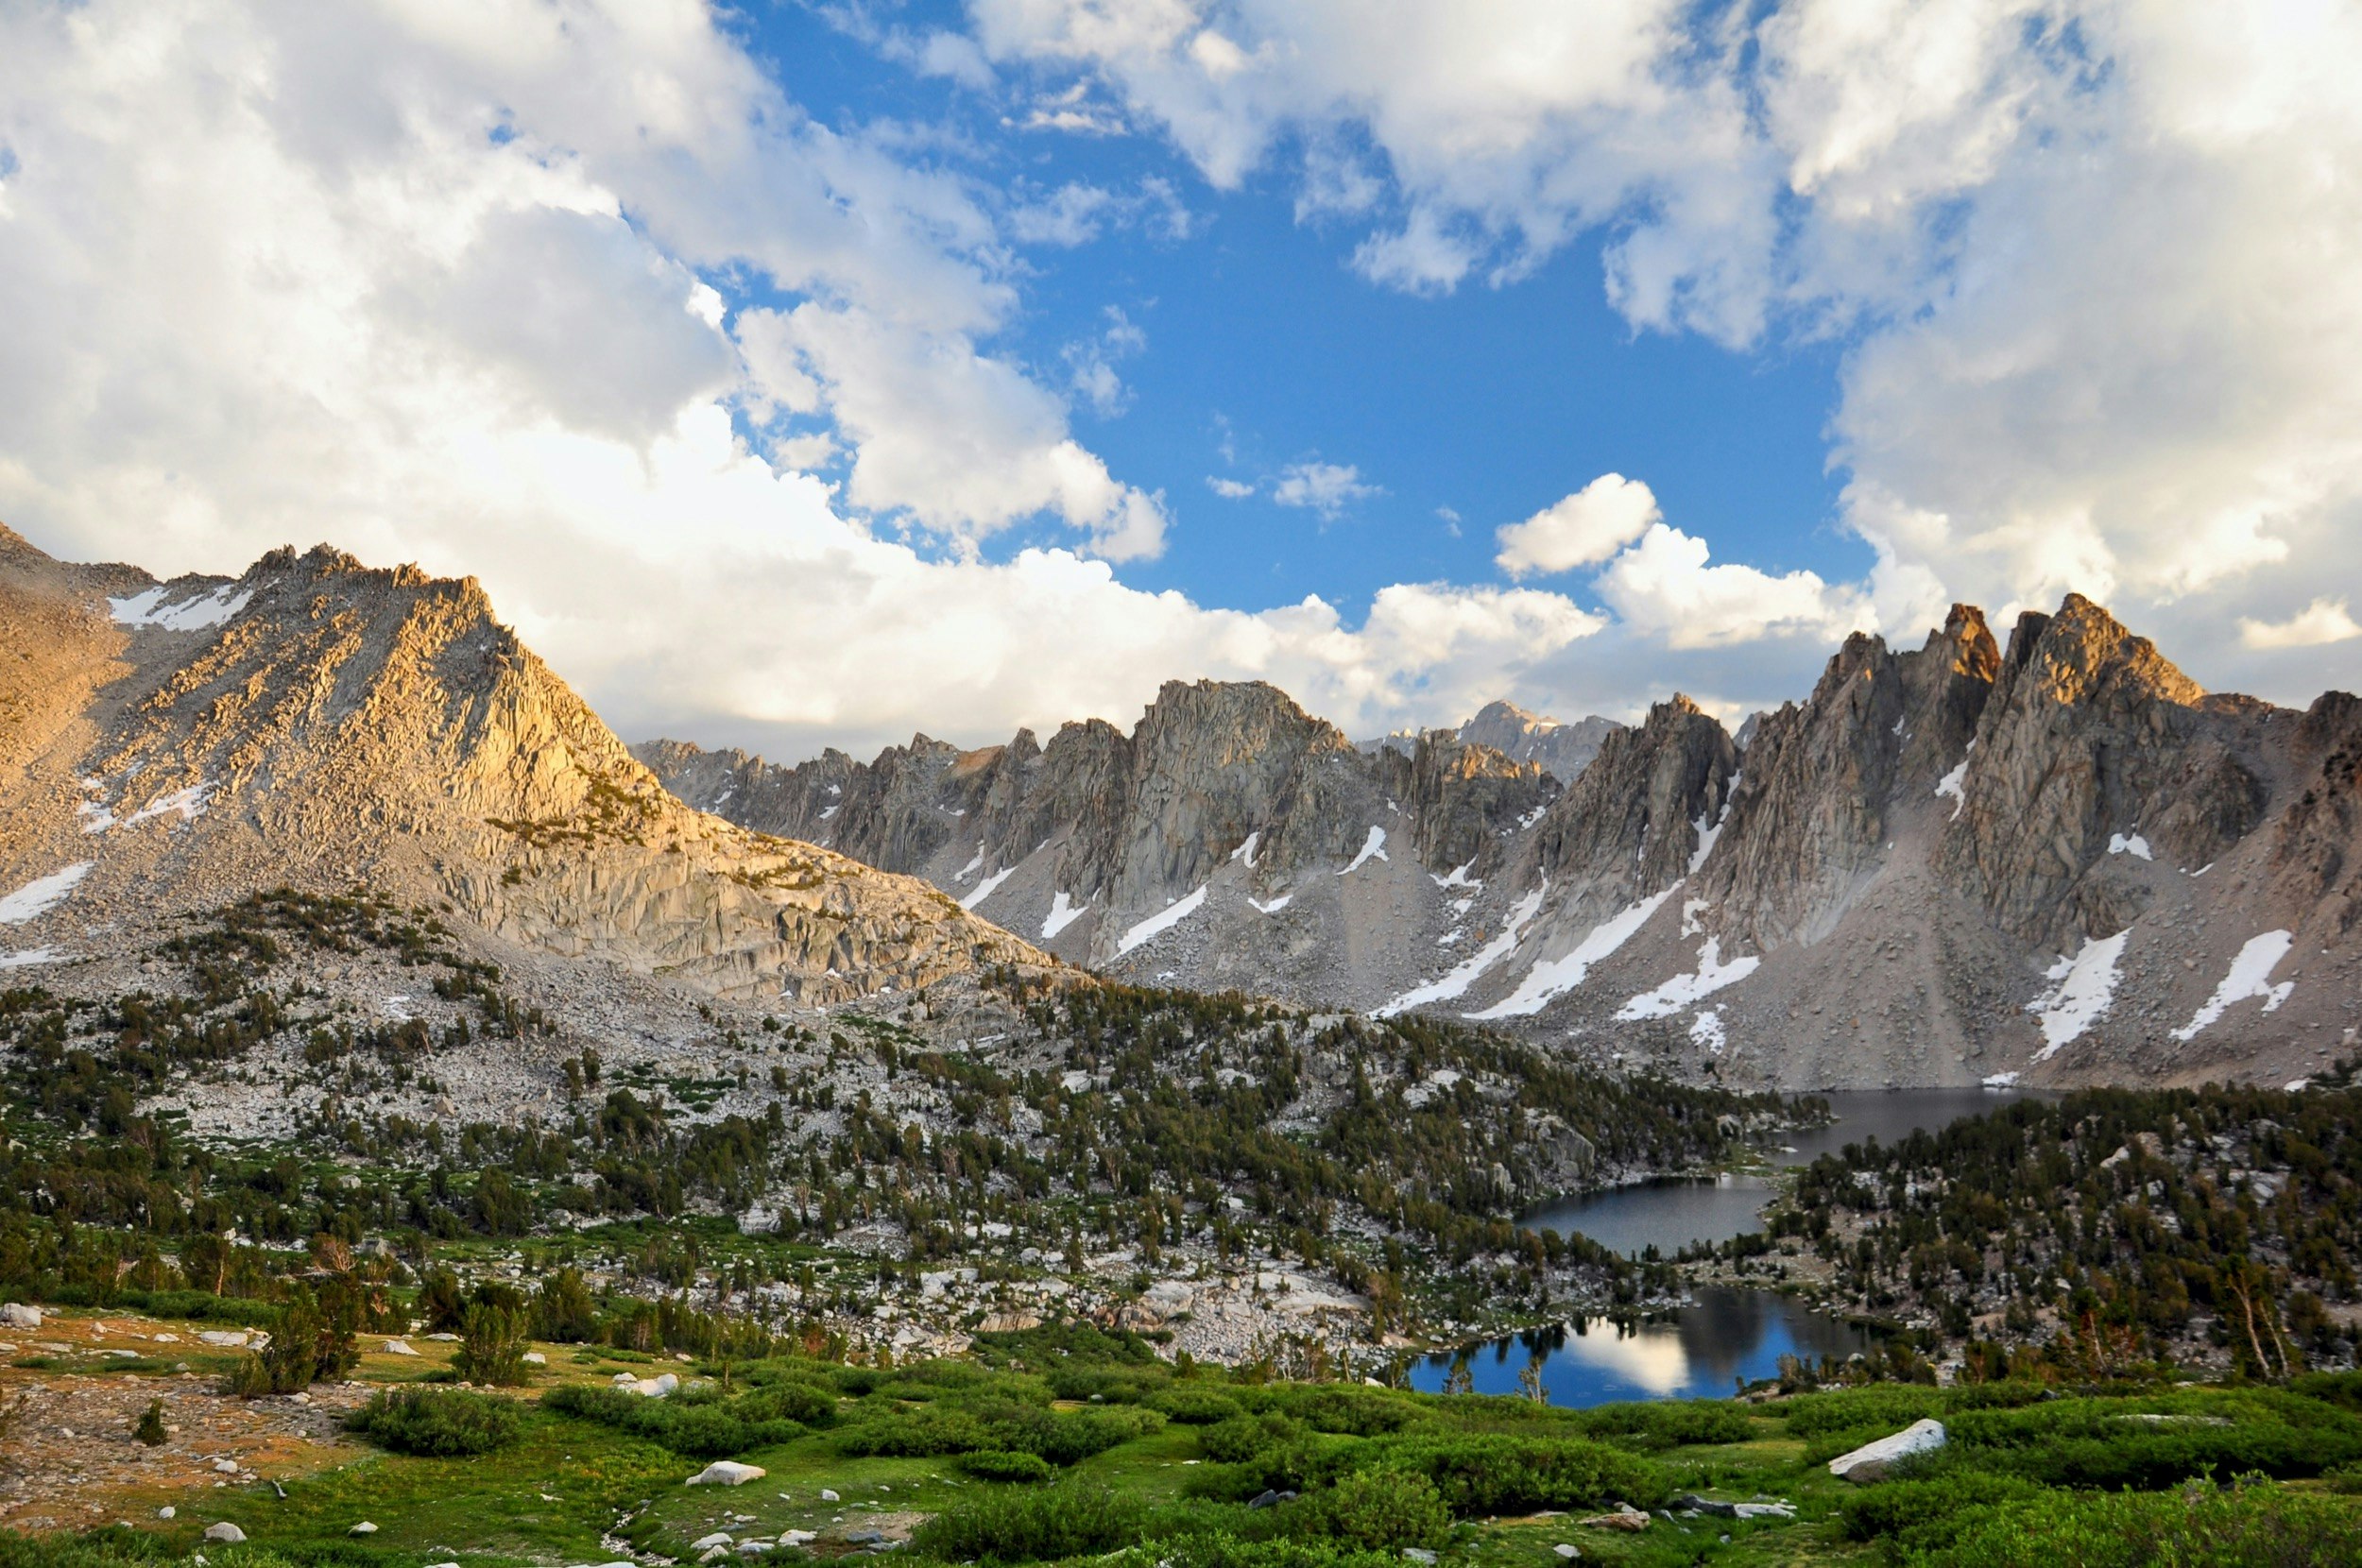 Snowy peaks, glittering lakes and greenery mark Kings Canyon National Park